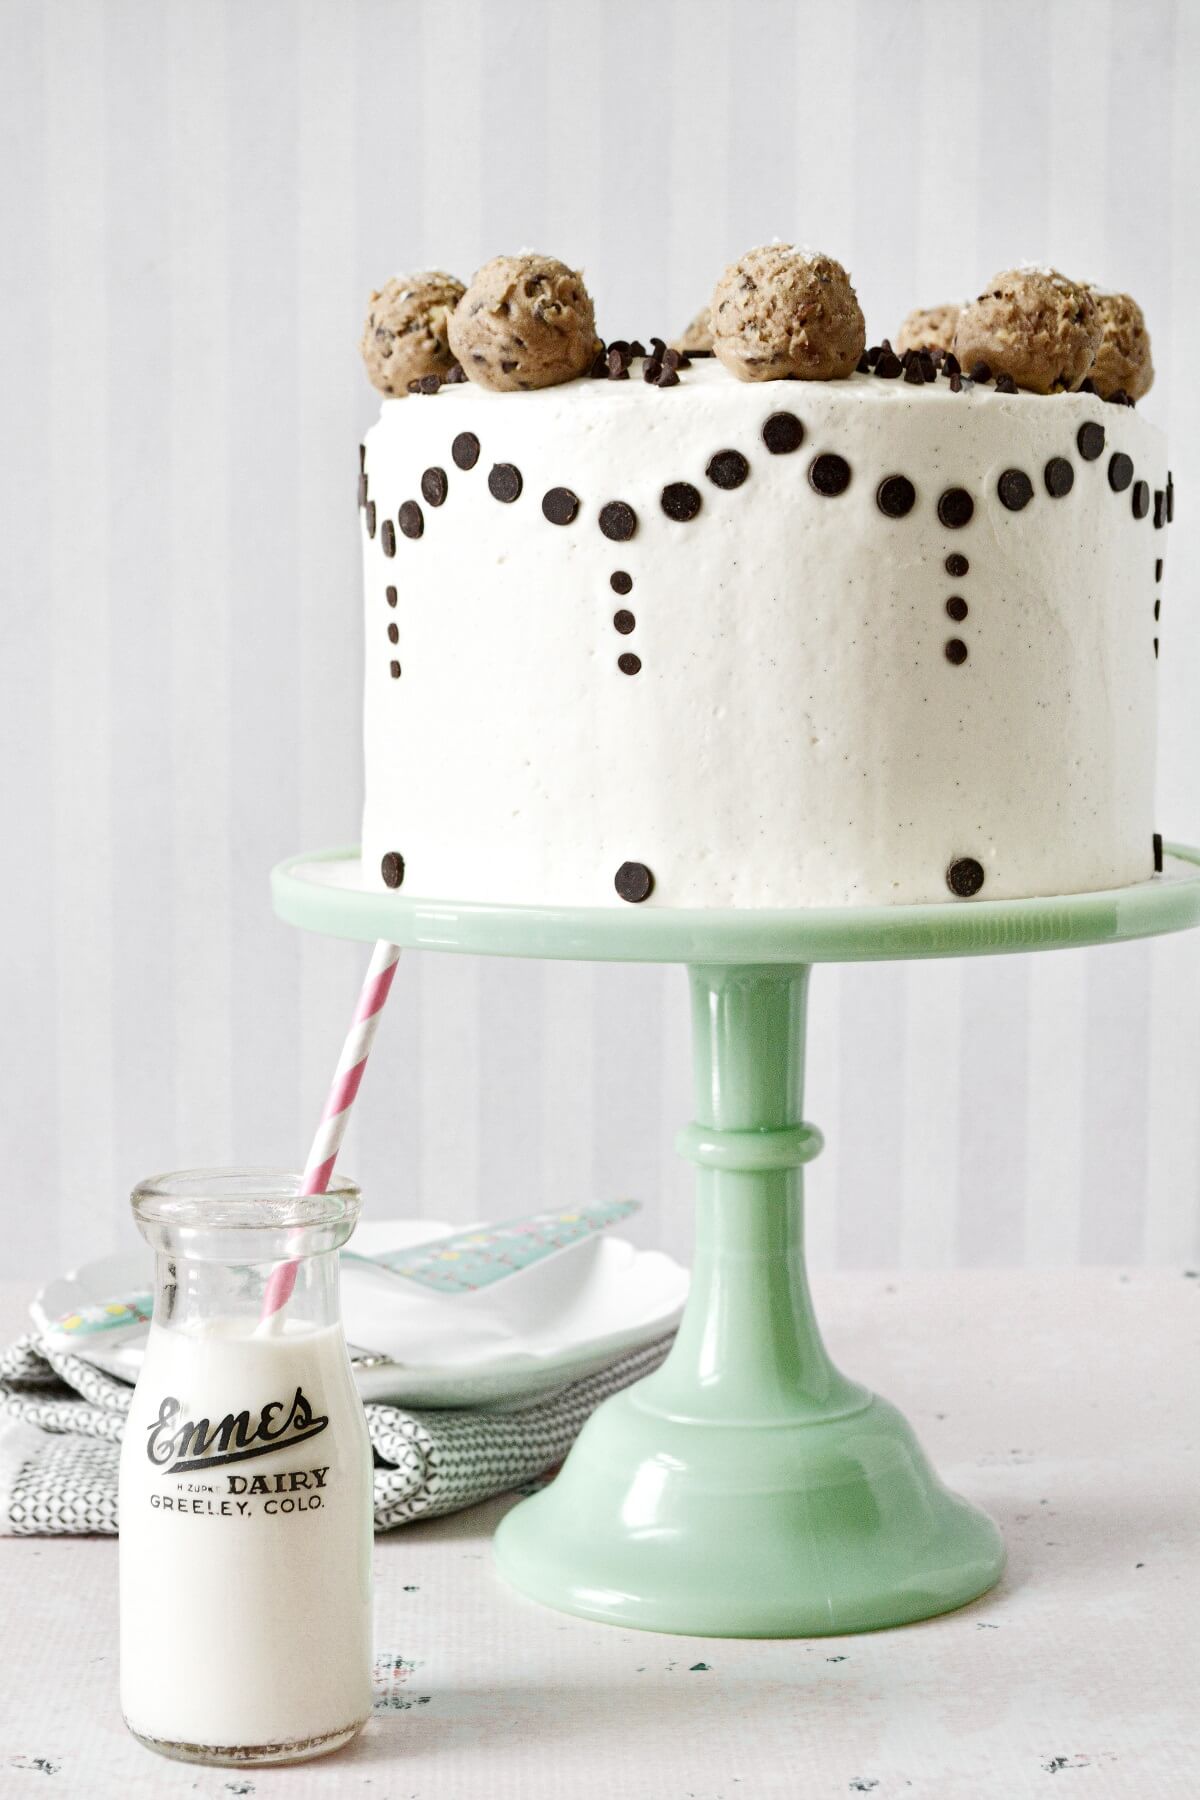 Chocolate chip cookie dough cake, decorated with chocolate chips and balls of cookie dough.